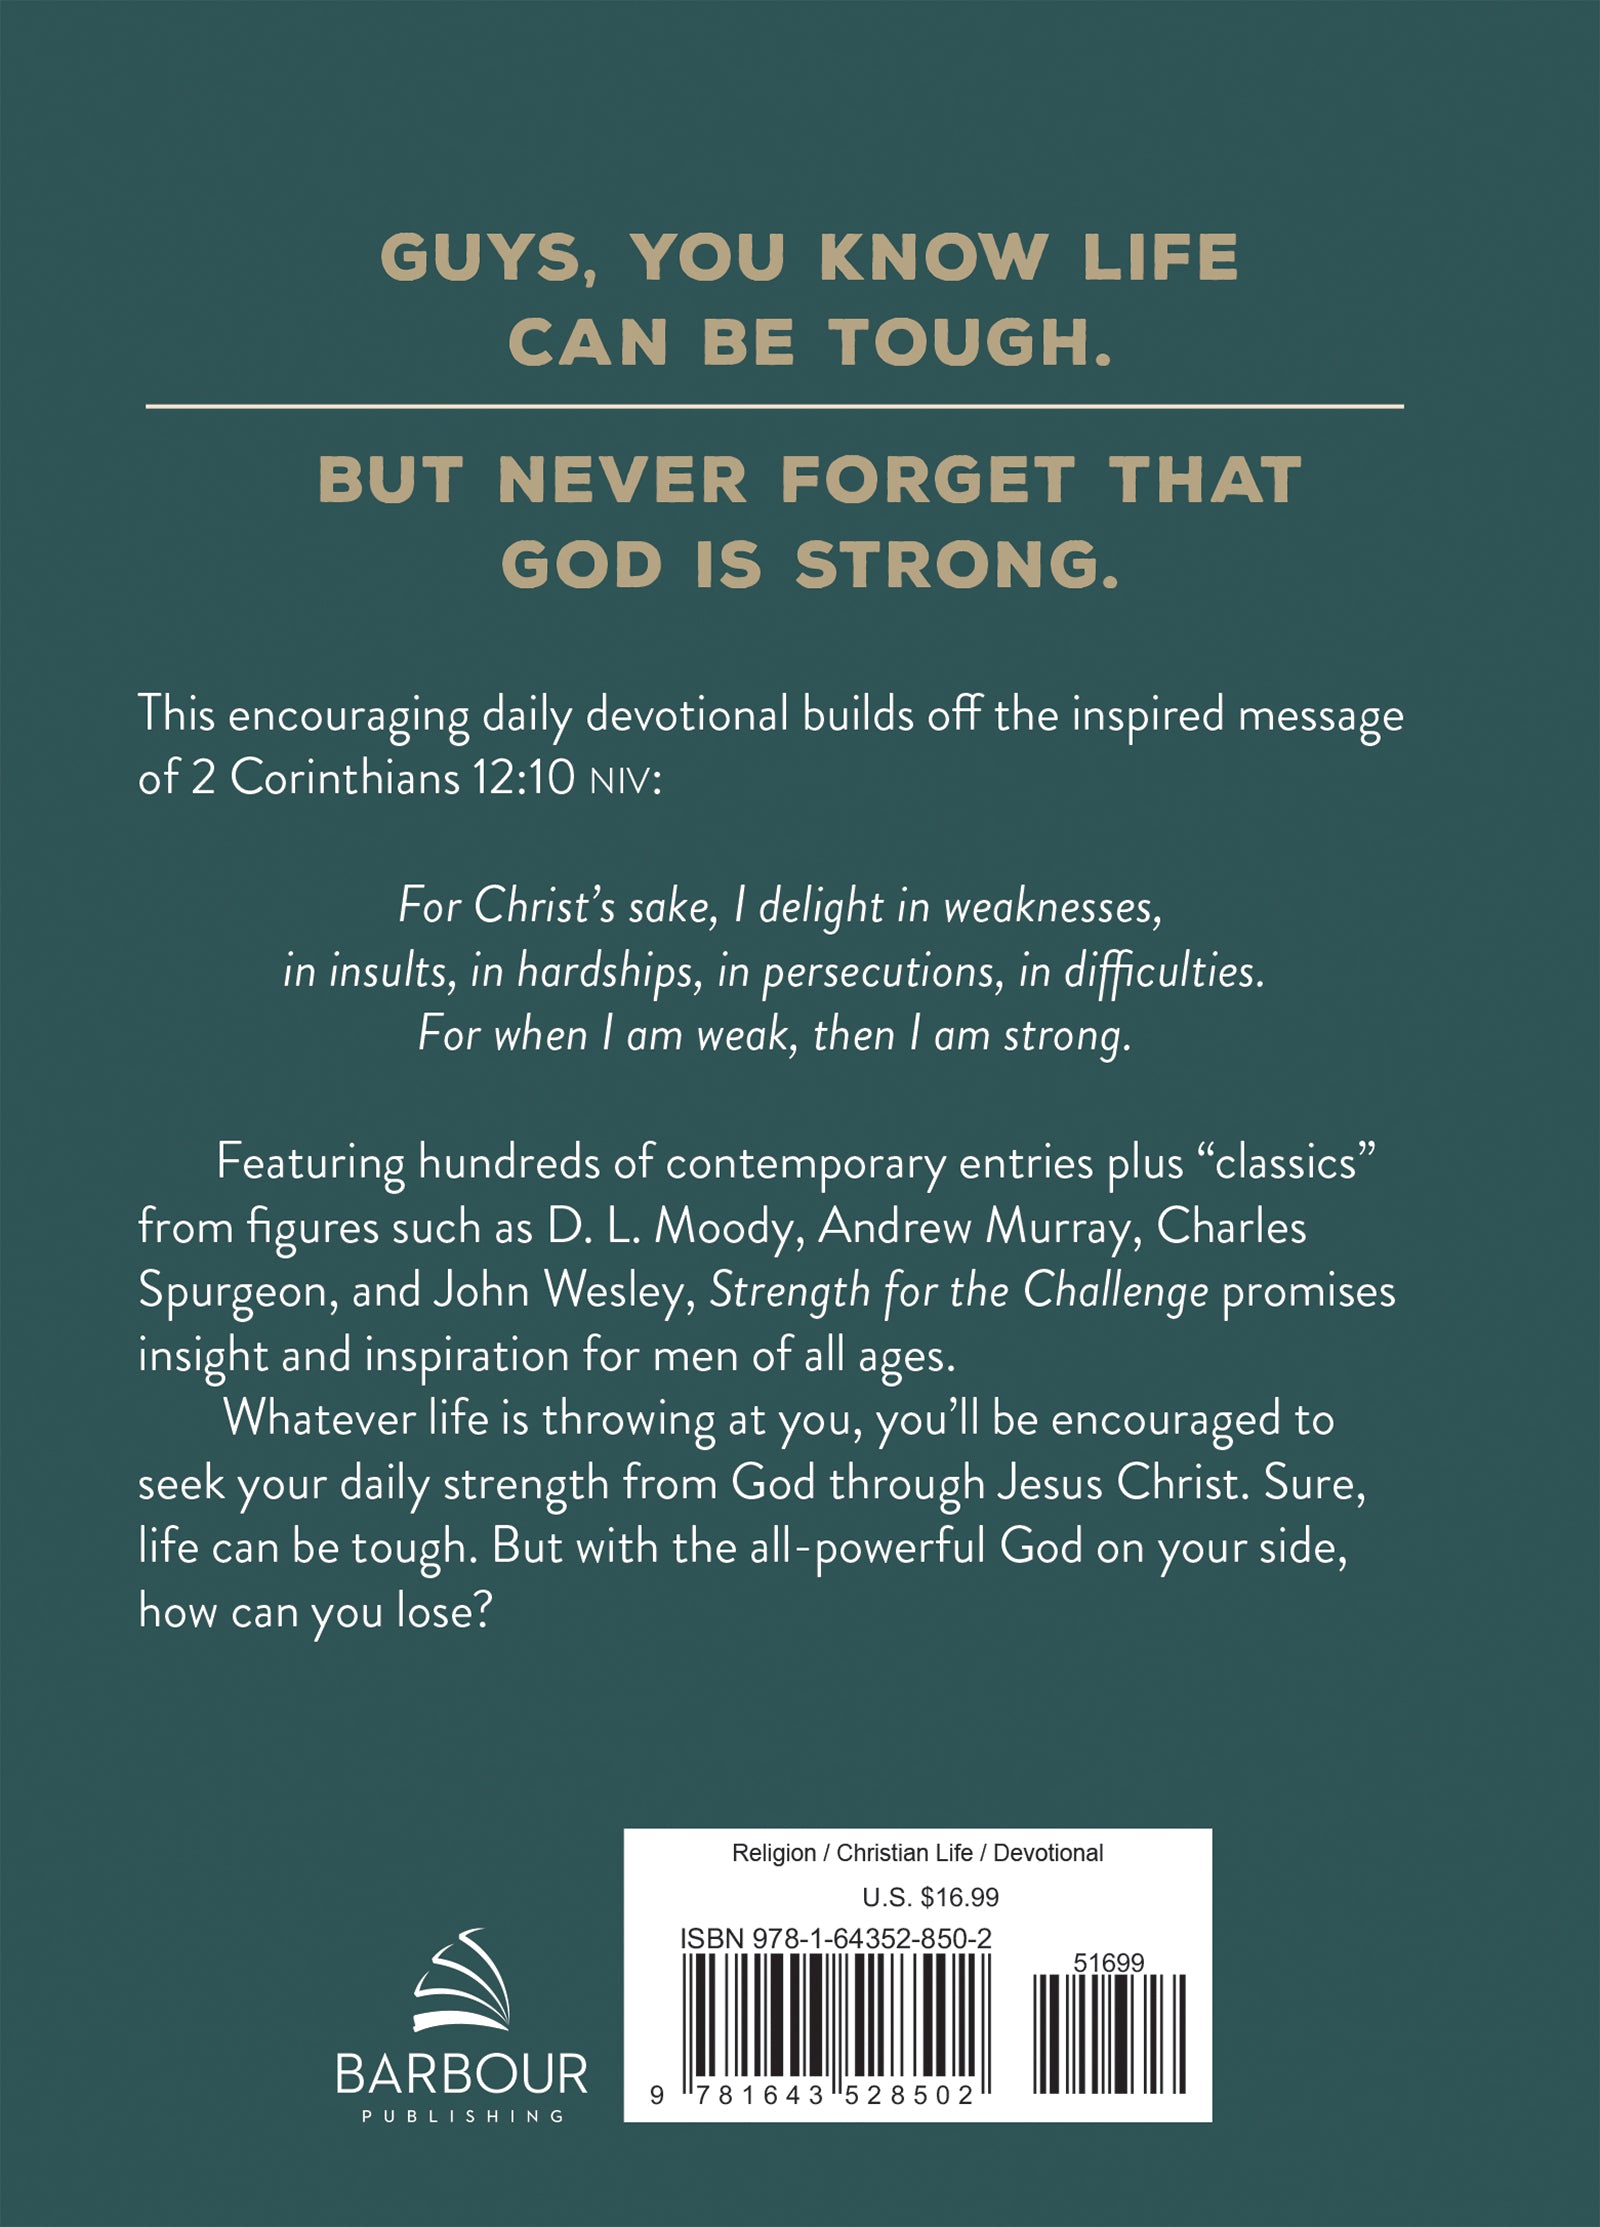 Strength for the Challenge - The Christian Gift Company